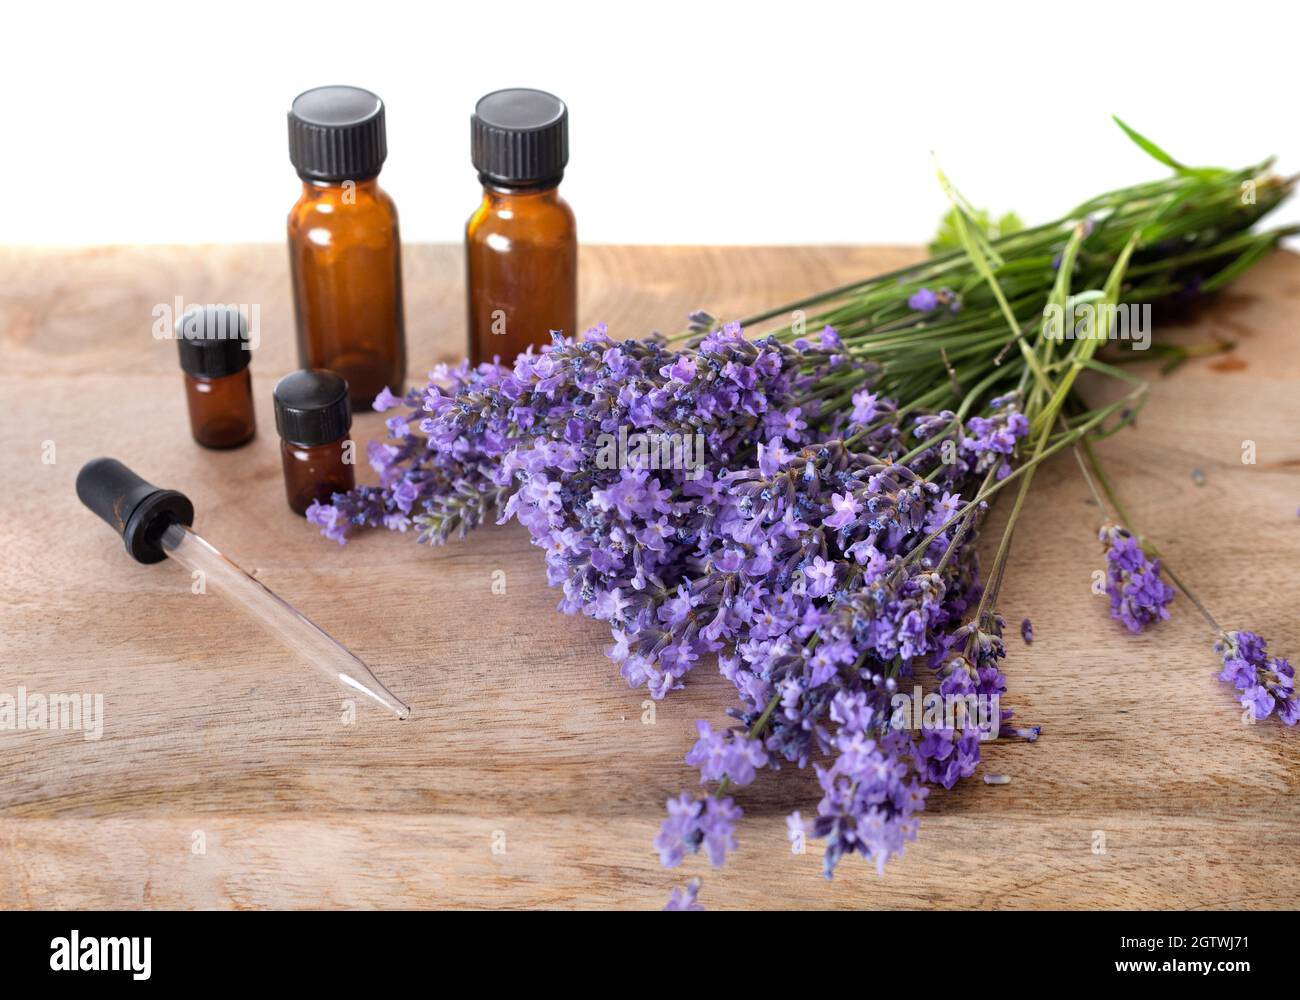 Lavender Flowers With Bottles On Table Stock Photo